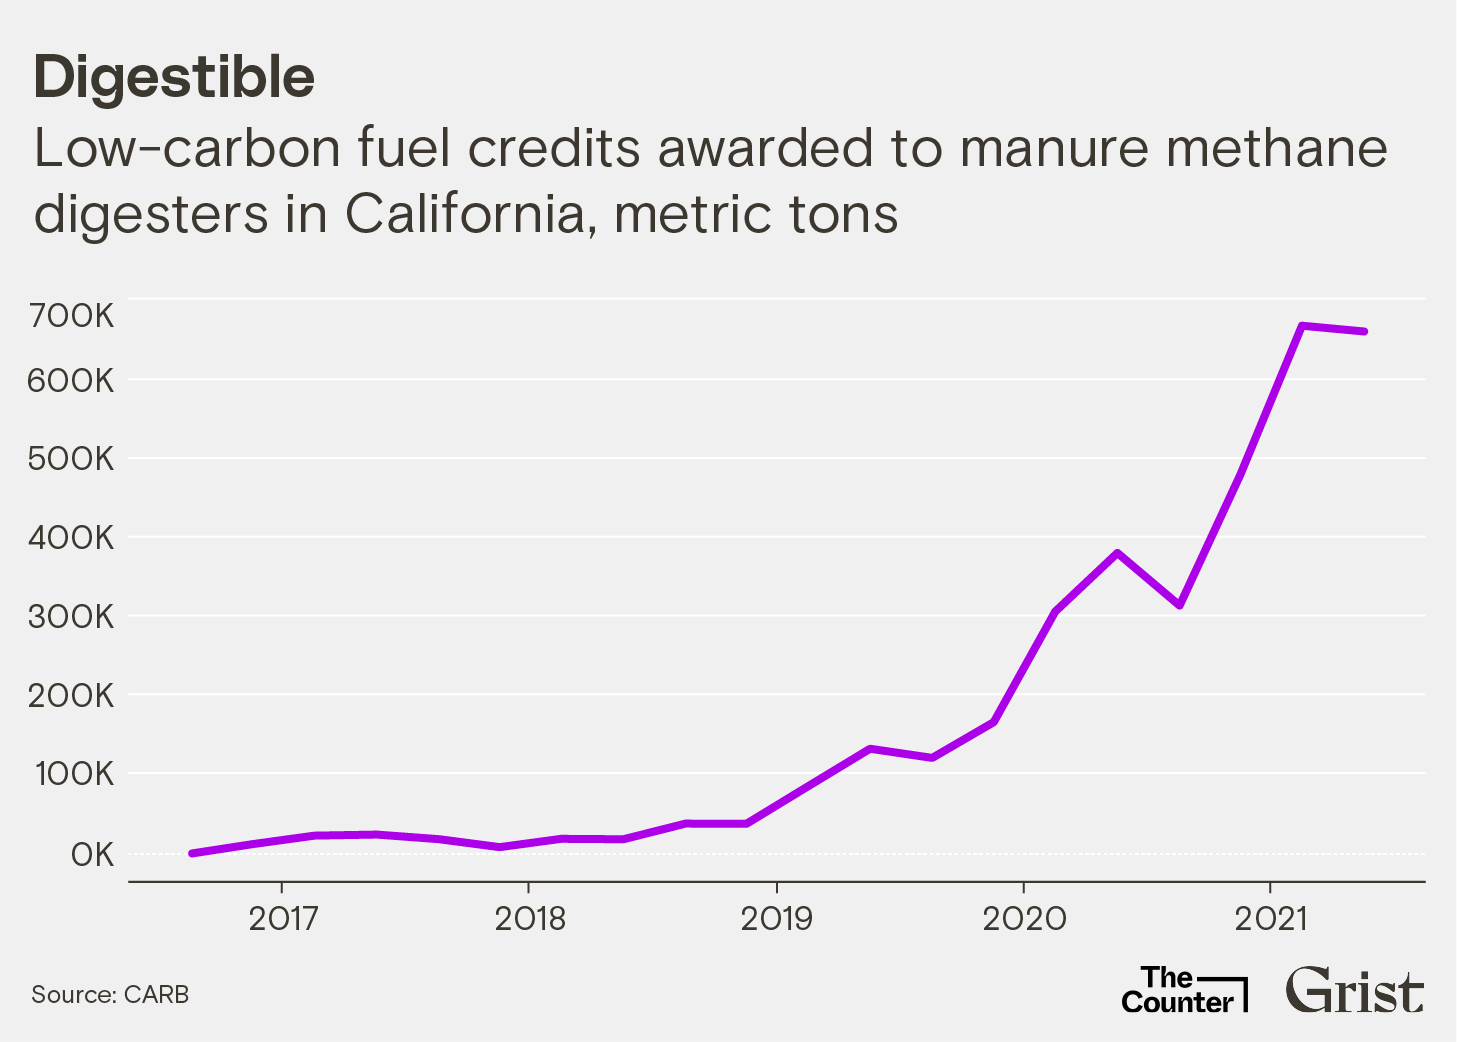 A line chart showing low-carbon fuel credits awarded to manure methane digesters in California between 2016 and 2021. LCFCs skyrocketed from almost zero to nearly 700,000 metric tons over this period.